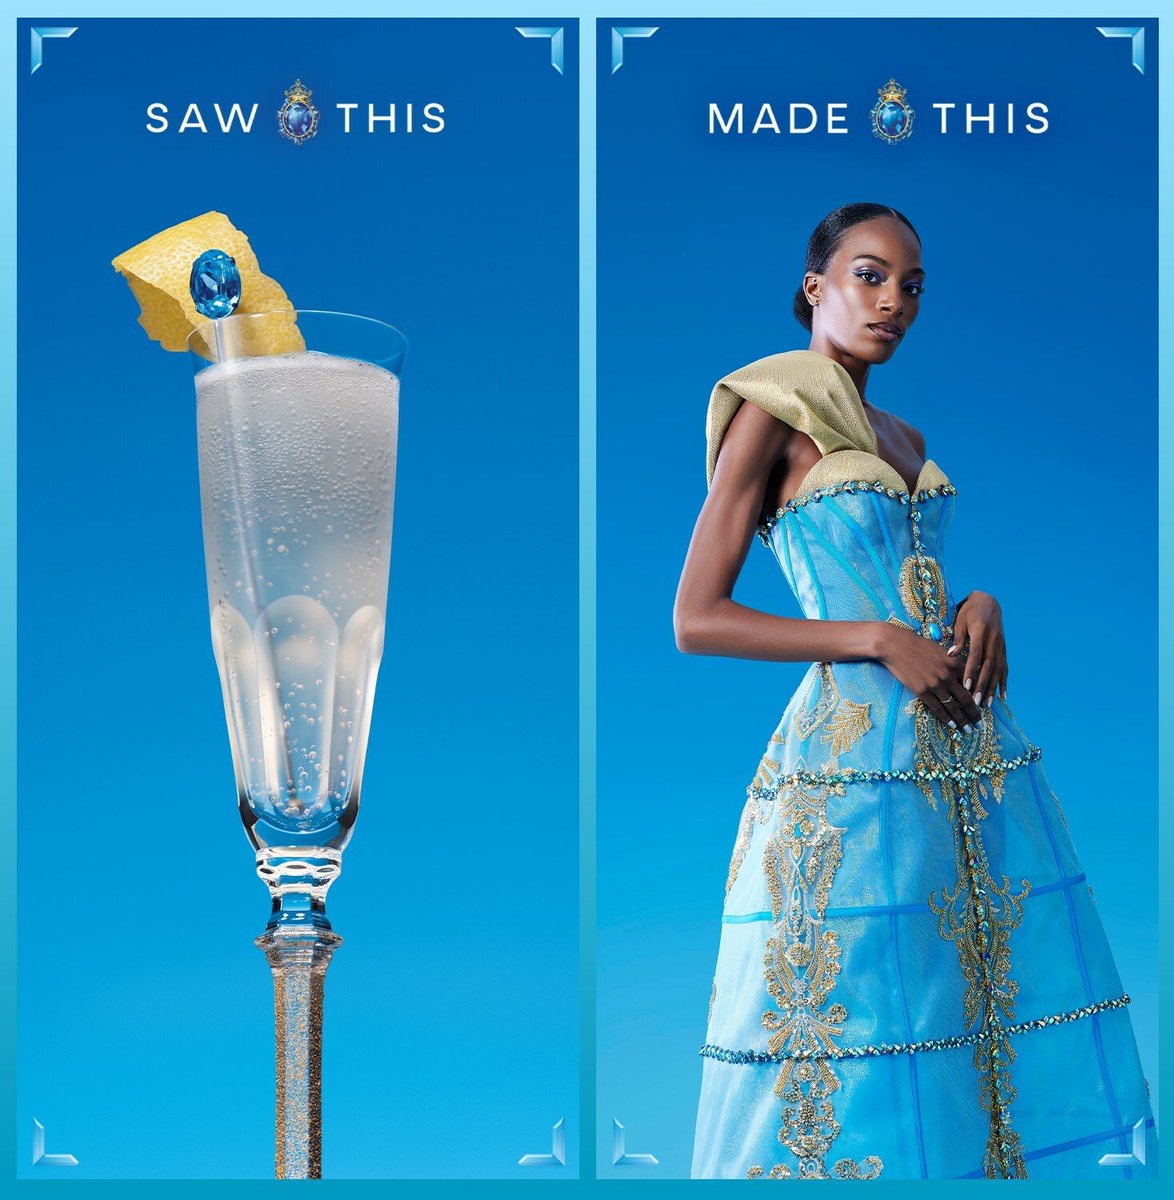 To kick off the spirit of this week’s #MFW2023 , we reflect on #NYFW2023 where @energybbdo & #BombaySapphireGin 🍸asked @CSiriano , what if cocktails could be fashion too? Their #SAWTHISMADETHIS campaign proved that the two worlds may fit better together than we thought. ⬇️